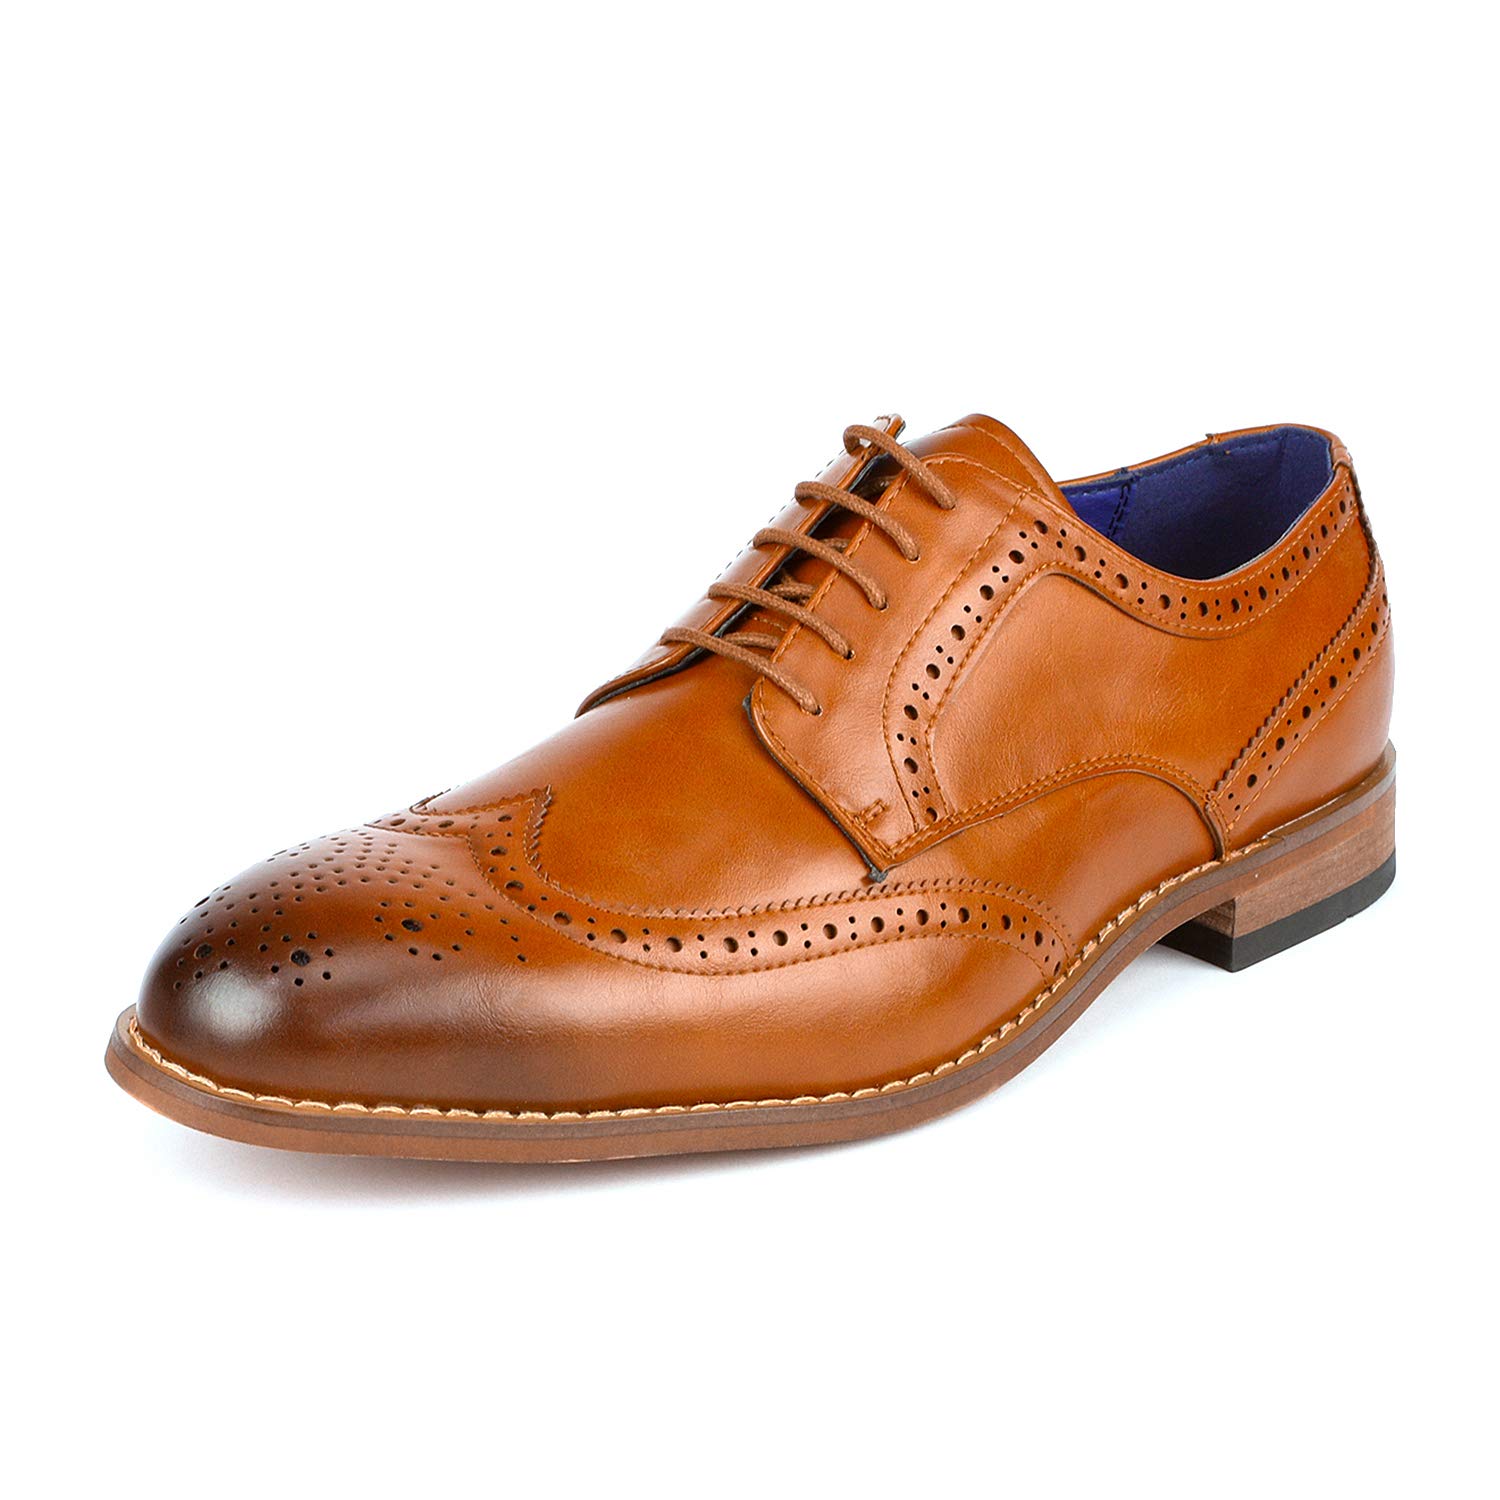 Bruno Marc Mens Brogue Oxford Shoes Lace up Wing Tip Dress Shoes Casual Shoes WILLIAM_2 CAMEL Size 7.5 - image 1 of 5